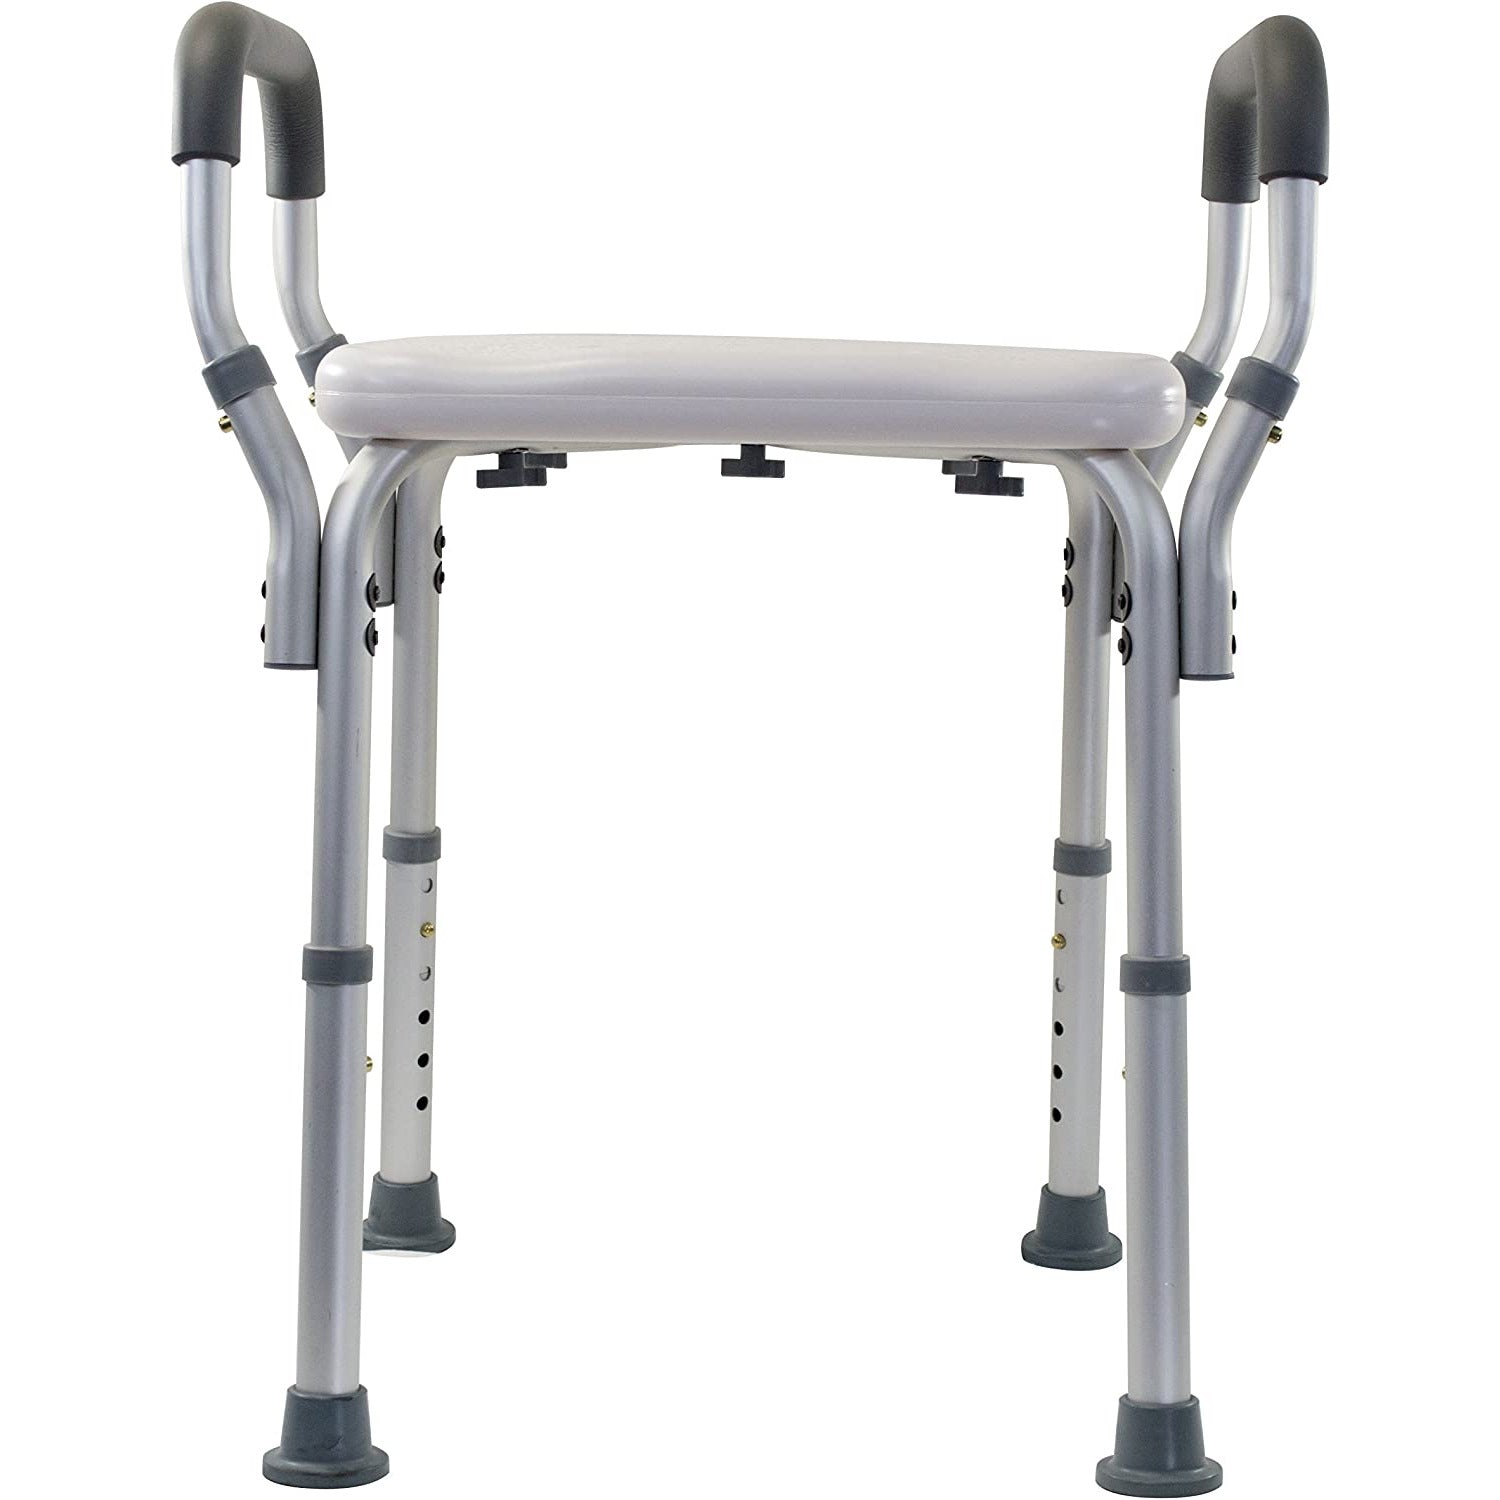 TrustLine Shower Chair | Safety Support Seat | For Elderly, Disabled, and Injured